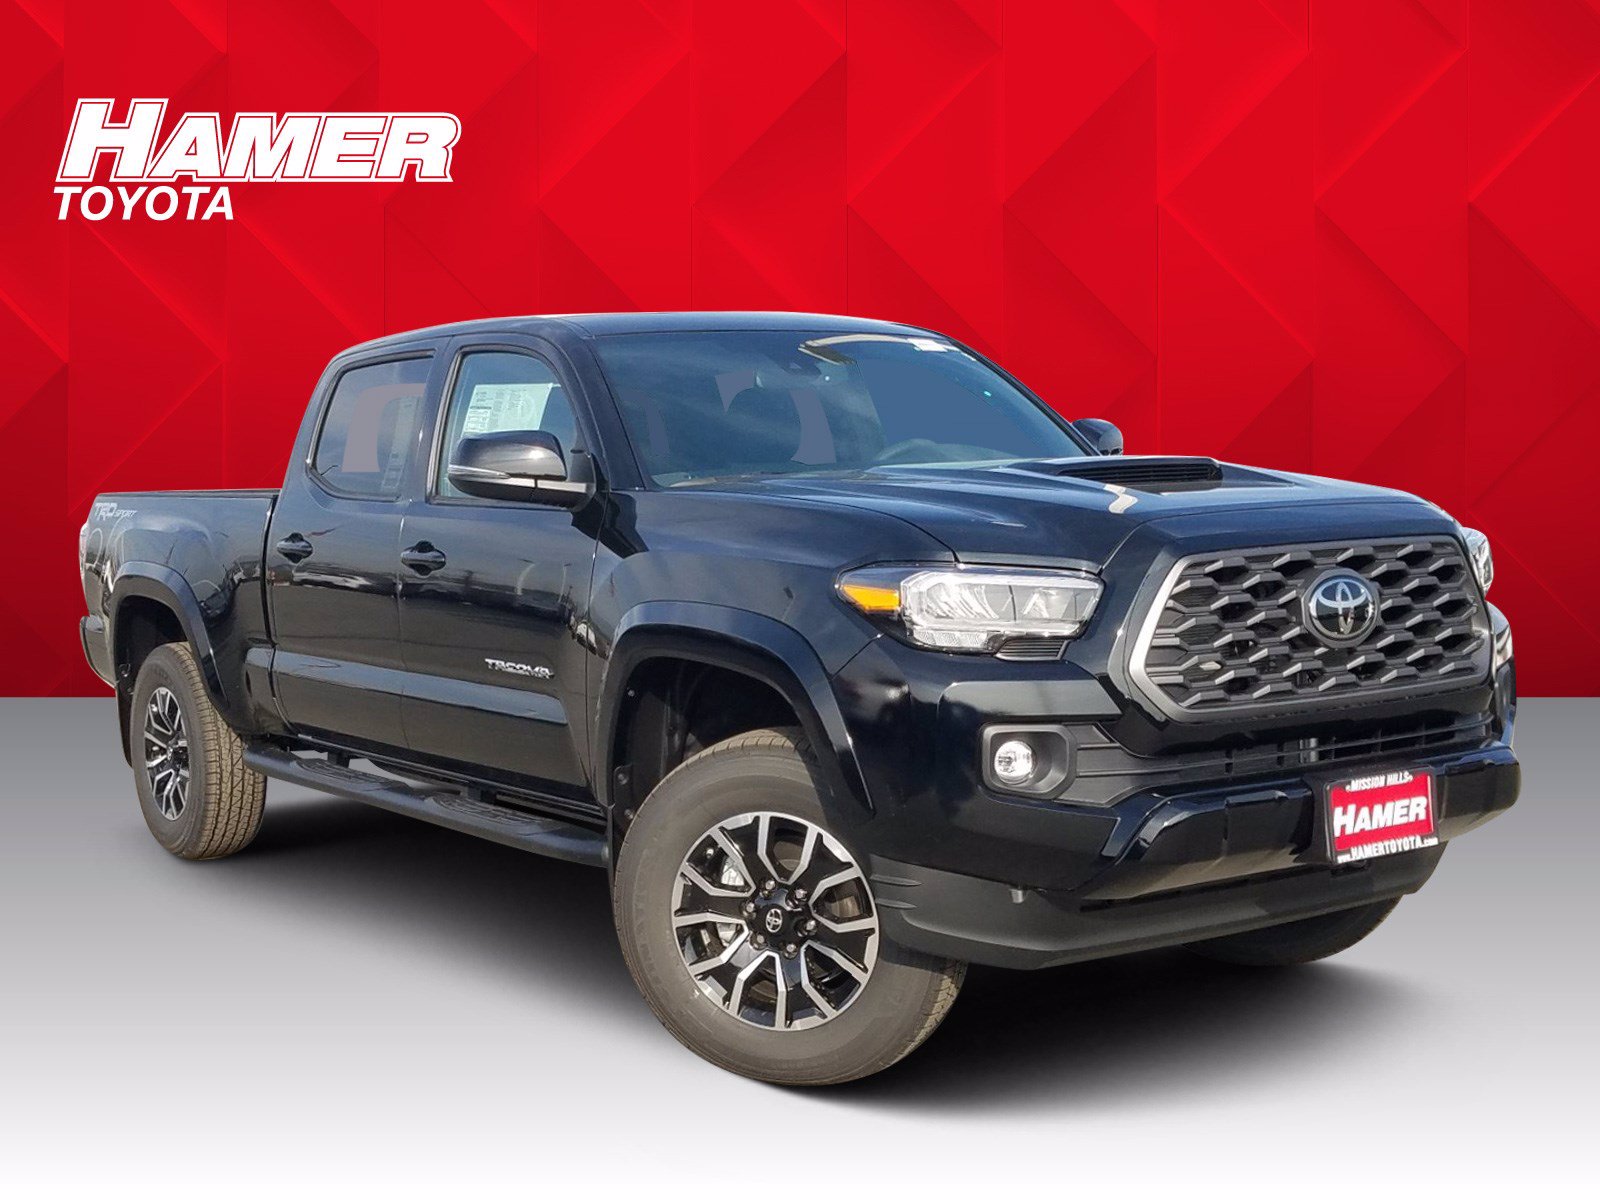 53 HQ Photos 2020 Tacoma Trd Sport Price / 2020 Toyota Tacoma TRD Pro Sees $1,000 Price Hike Over ...